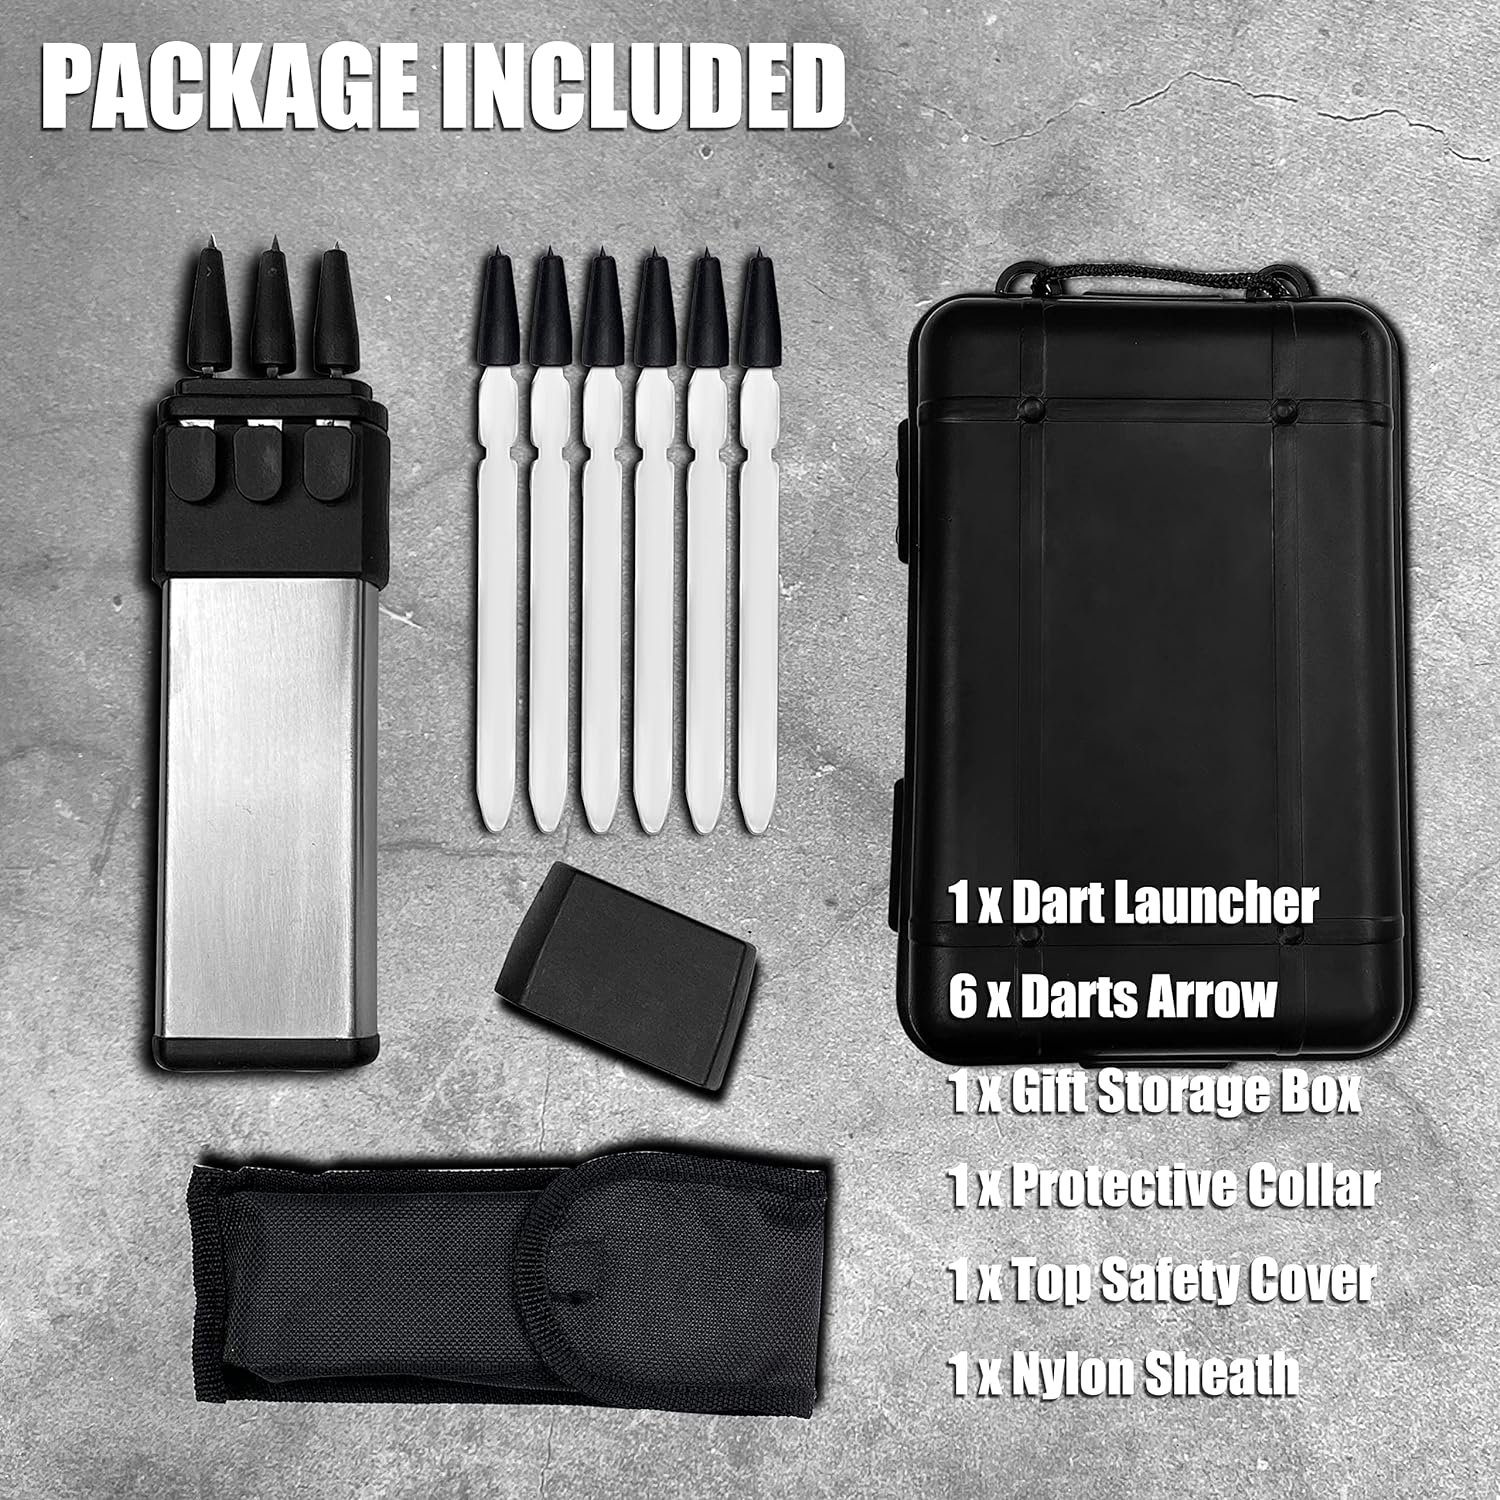 Ballistic Dart Launcher, Tactical EDC Gear Metal Darts Accurate Shooting Within 20ft for Hunting Shooting Camping Self-Defense and Survival, Adult Toy Gift W/Hard Tactical Sheath Box